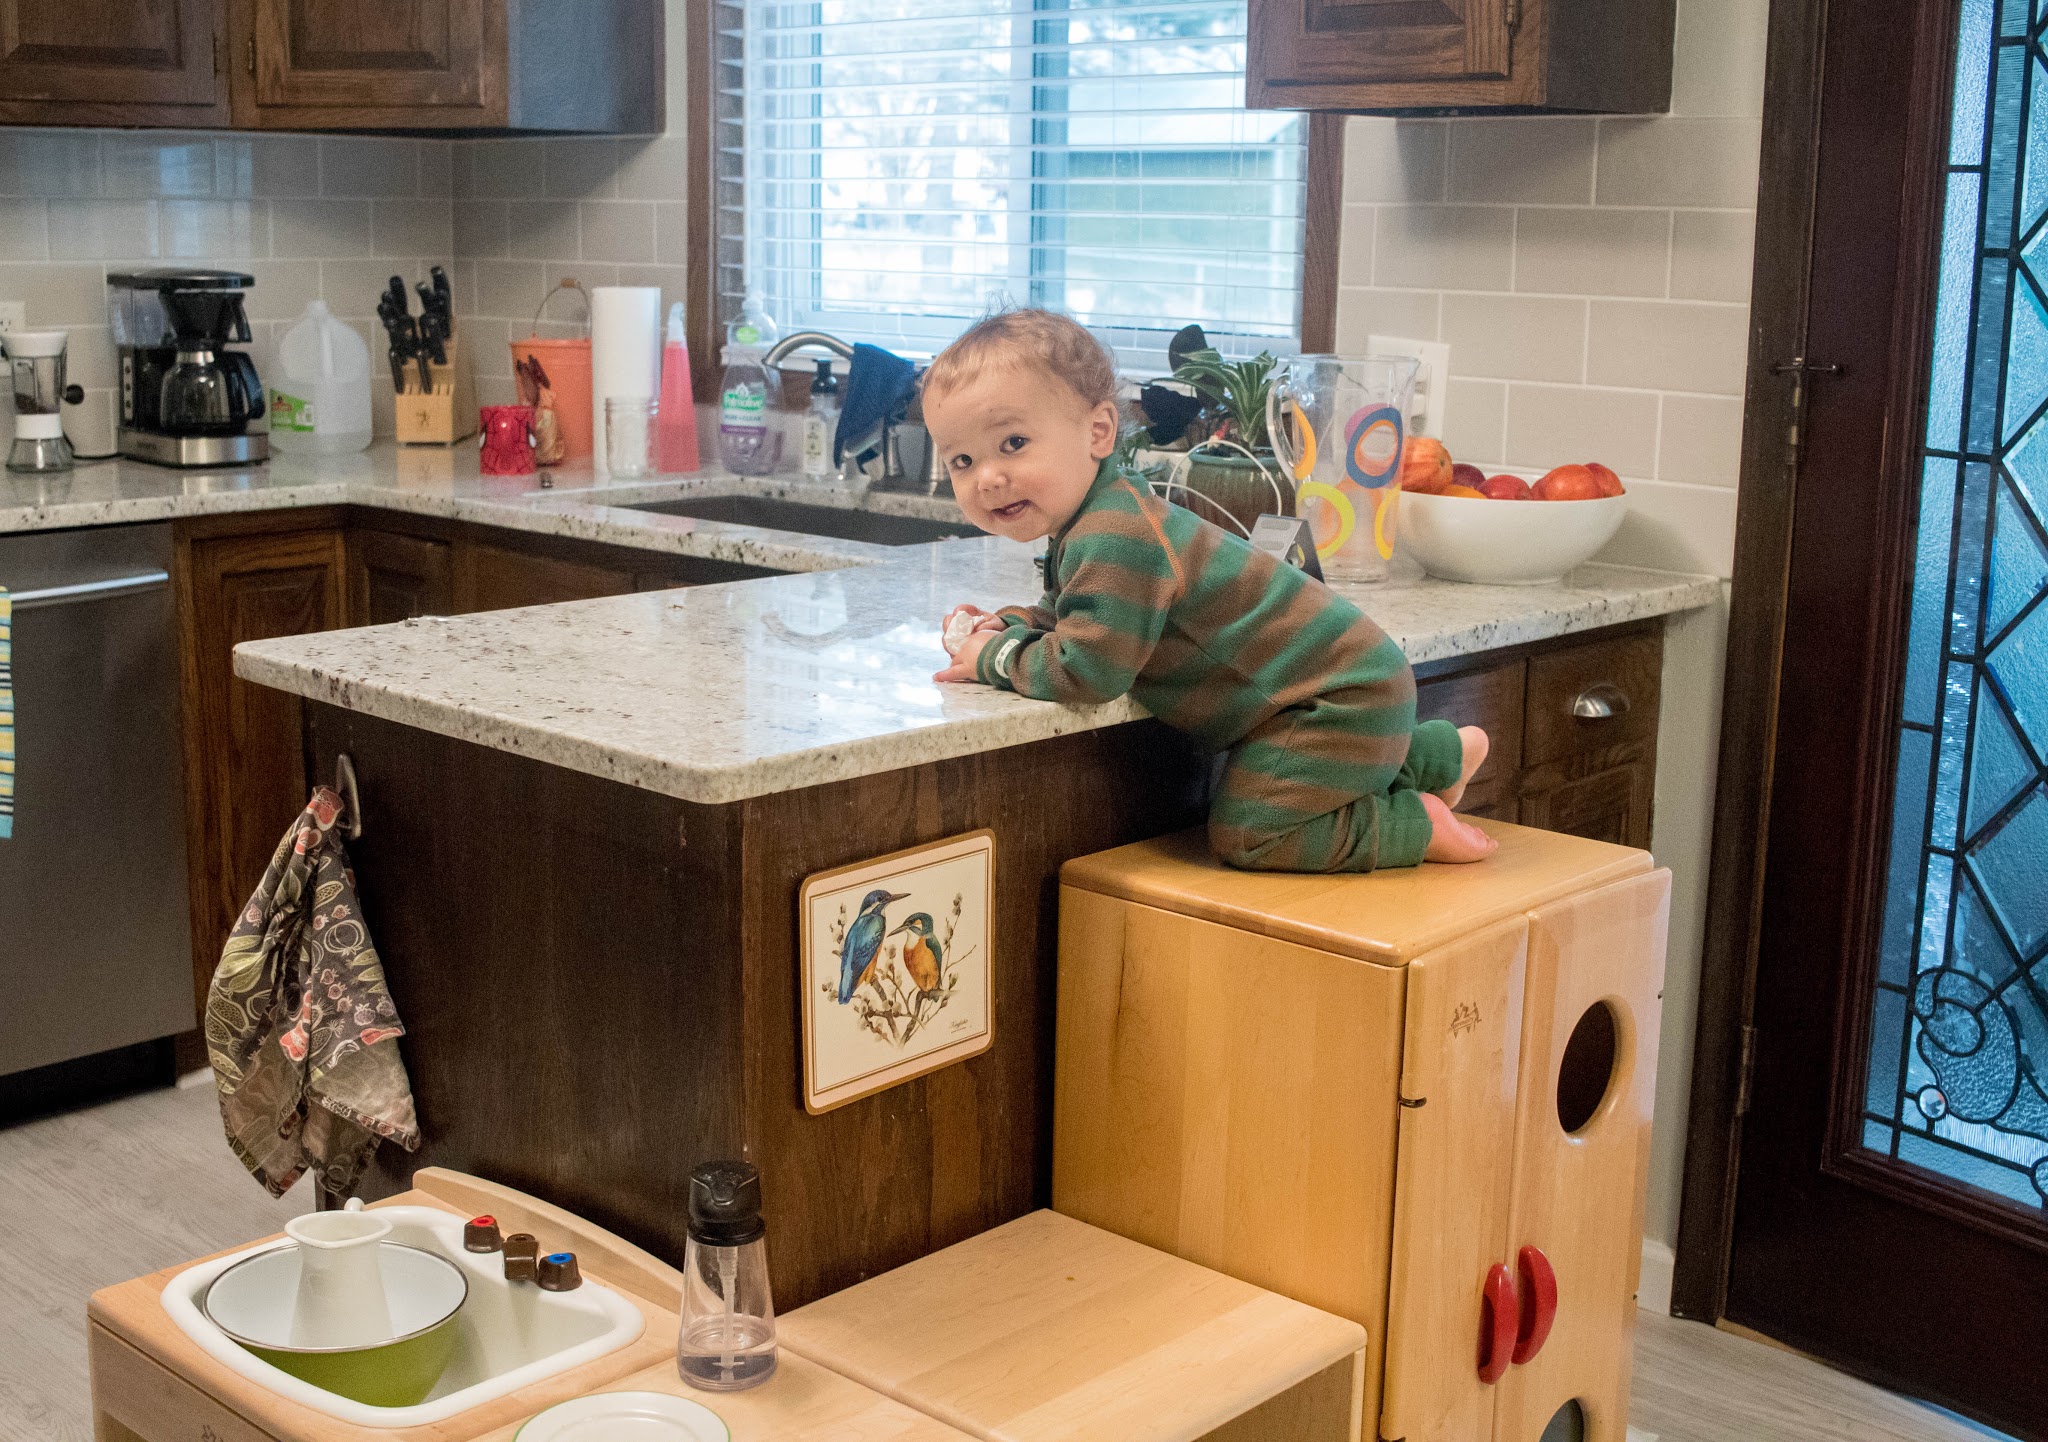 A young toddler climbs on kitchen counters of Montessori home. He looks toward the camera as his mom says "feet stay on the floor" as an example of positive action language to use when children test boundaries.